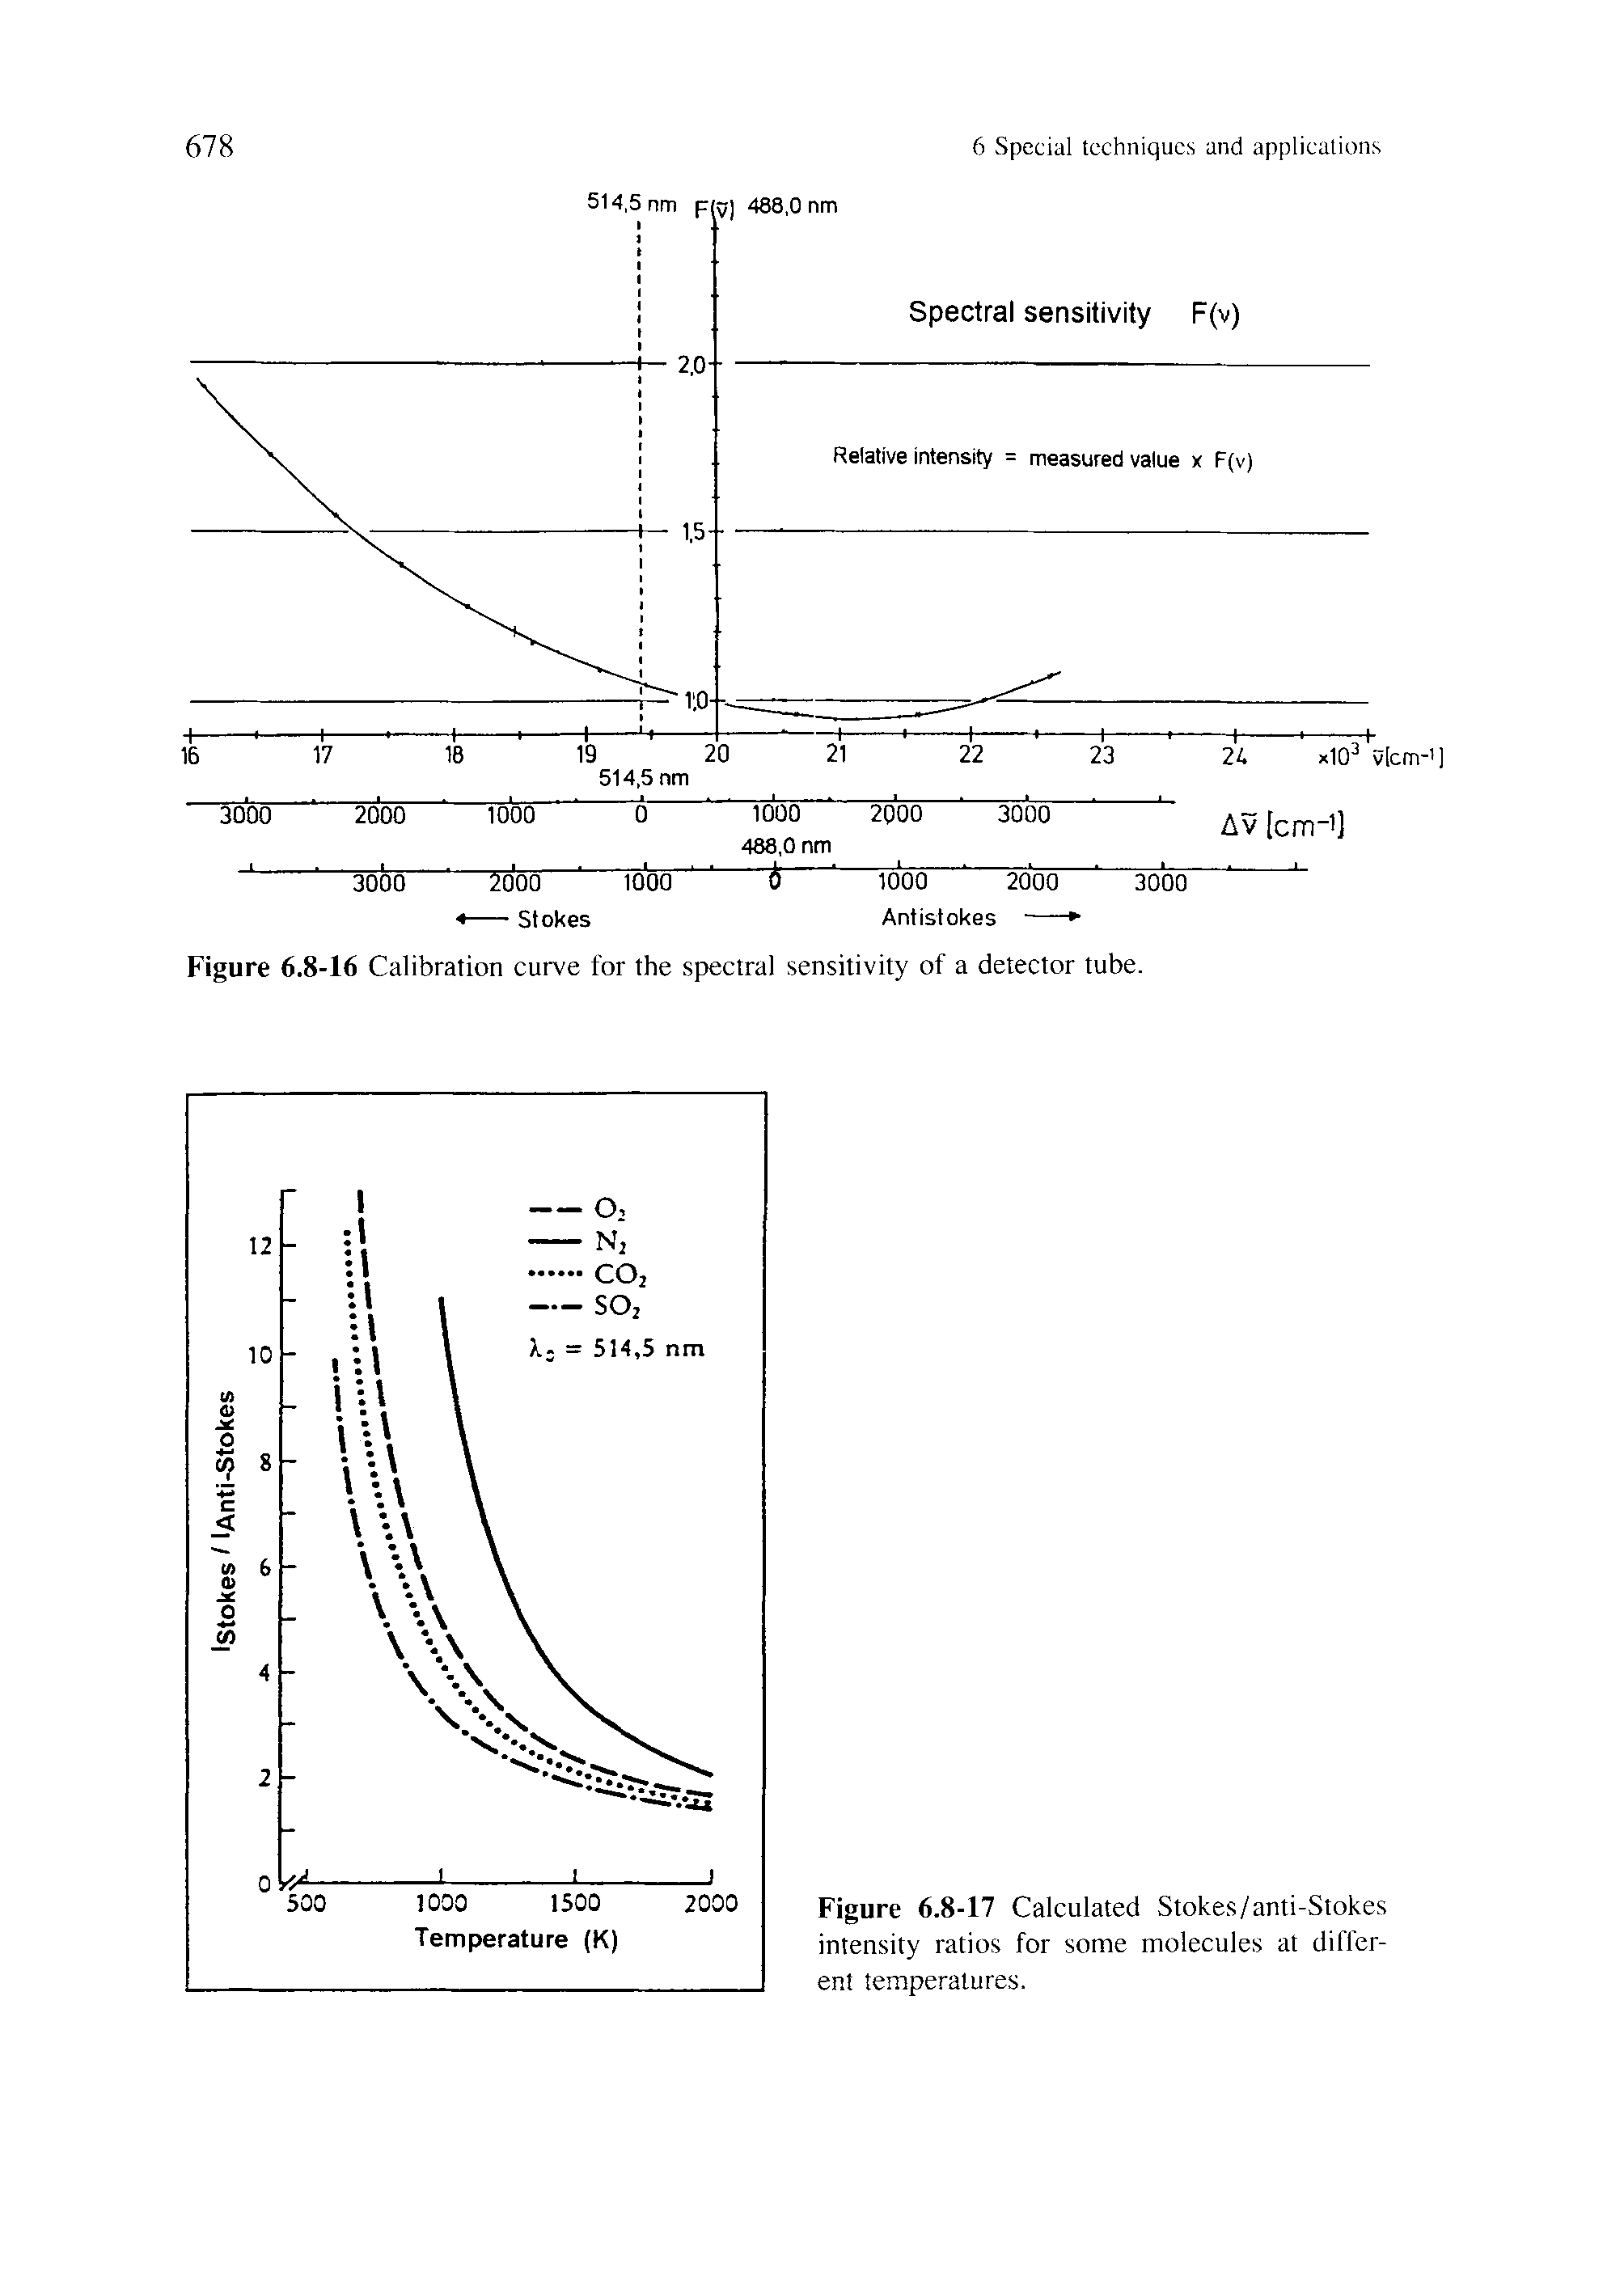 Figure 6.8-16 Calibration curve for the spectral sensitivity of a detector tube.